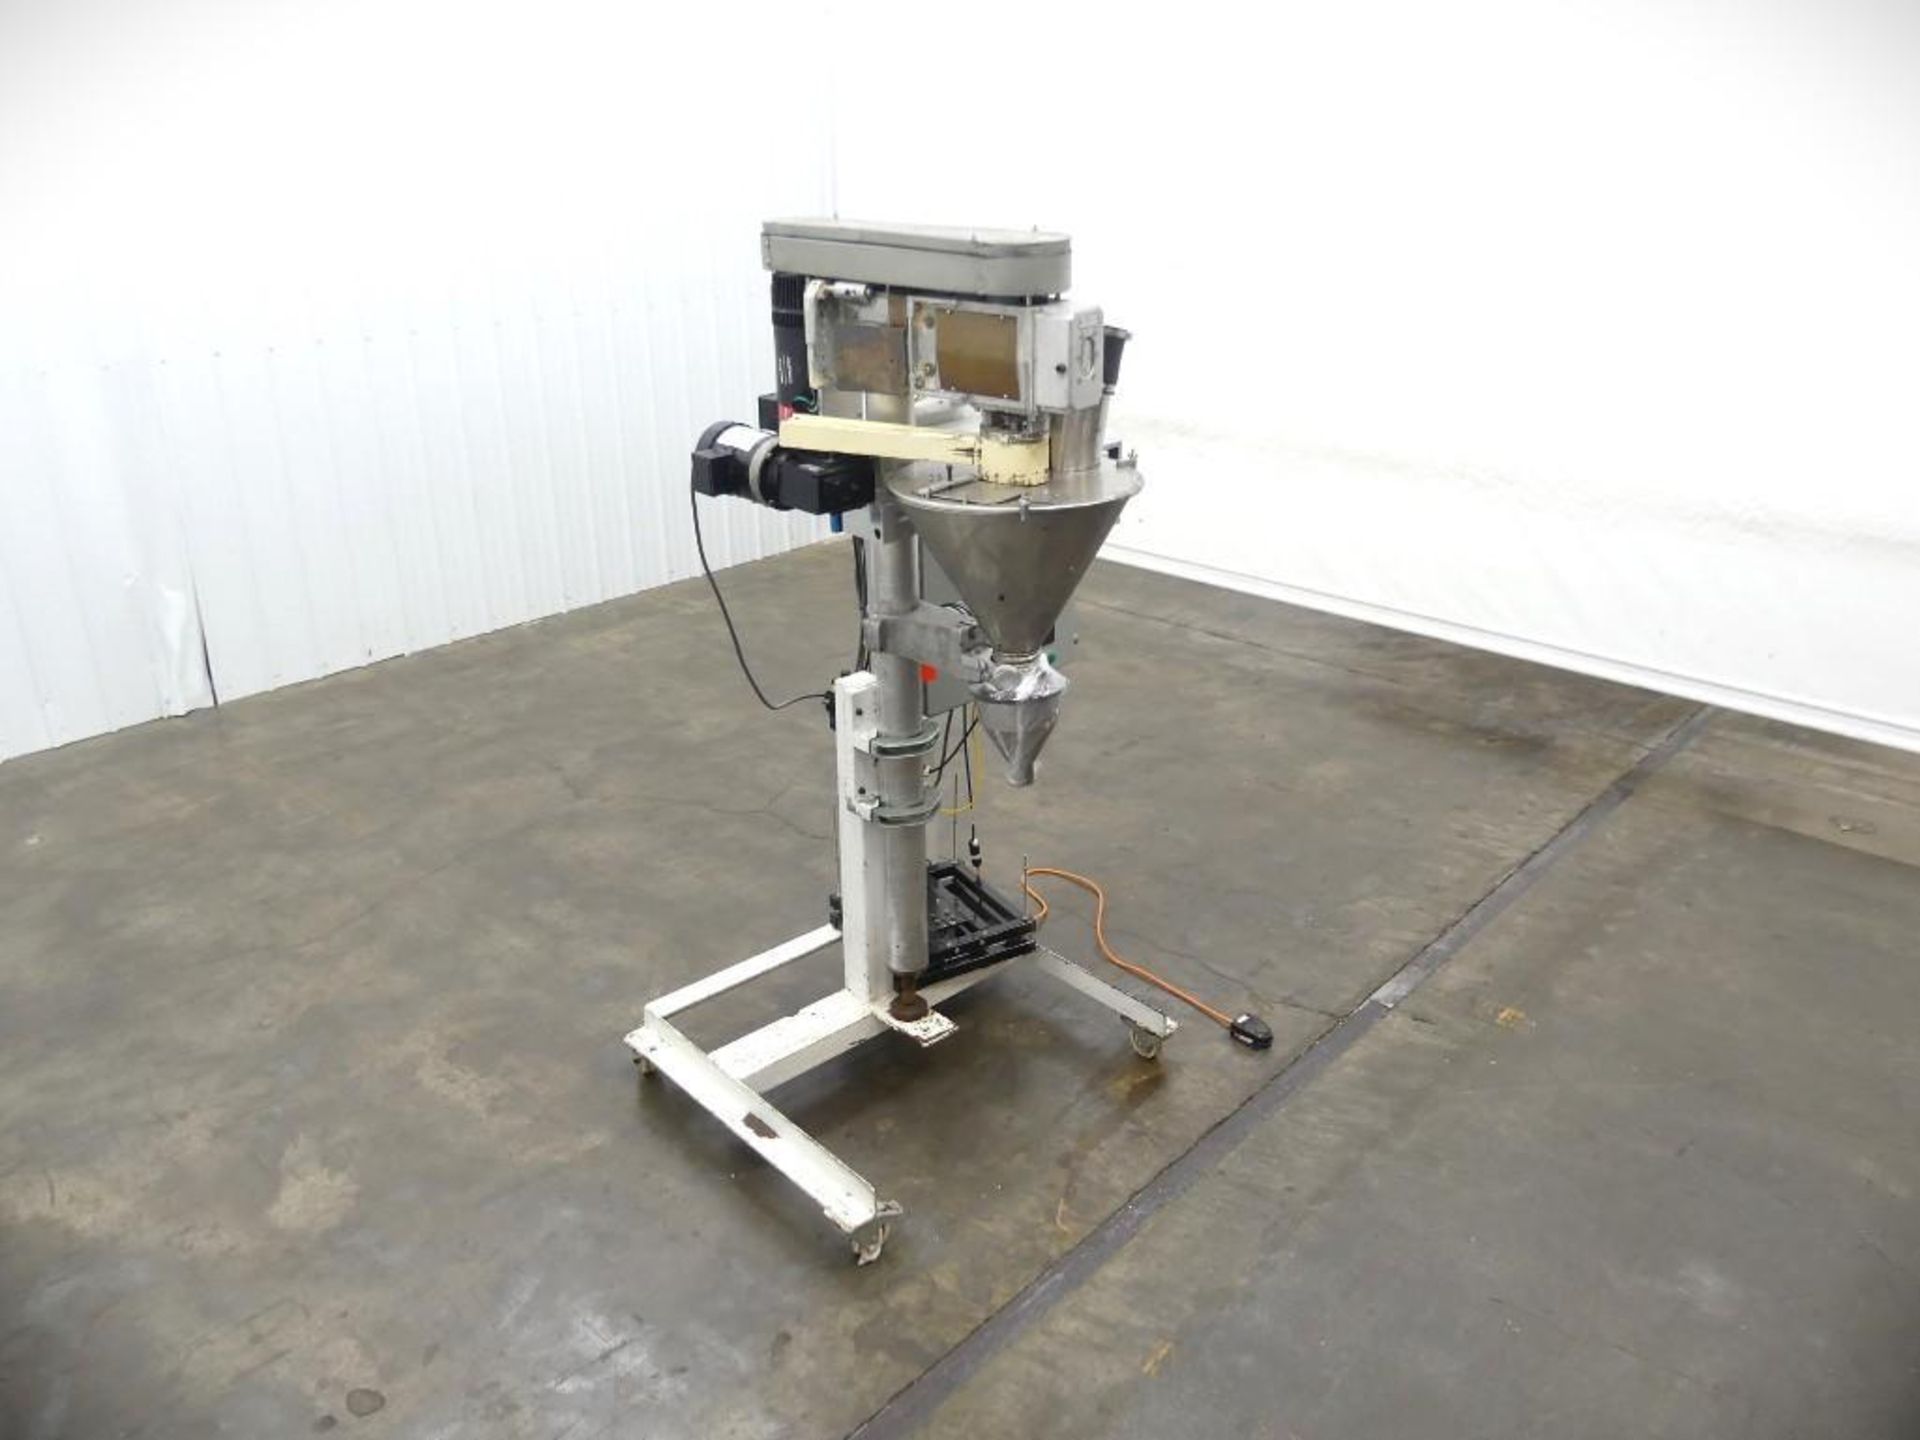 Mateer 31-A Stainless Steel 5 Gallon Hopper Auger Filler with Scale - Image 2 of 32